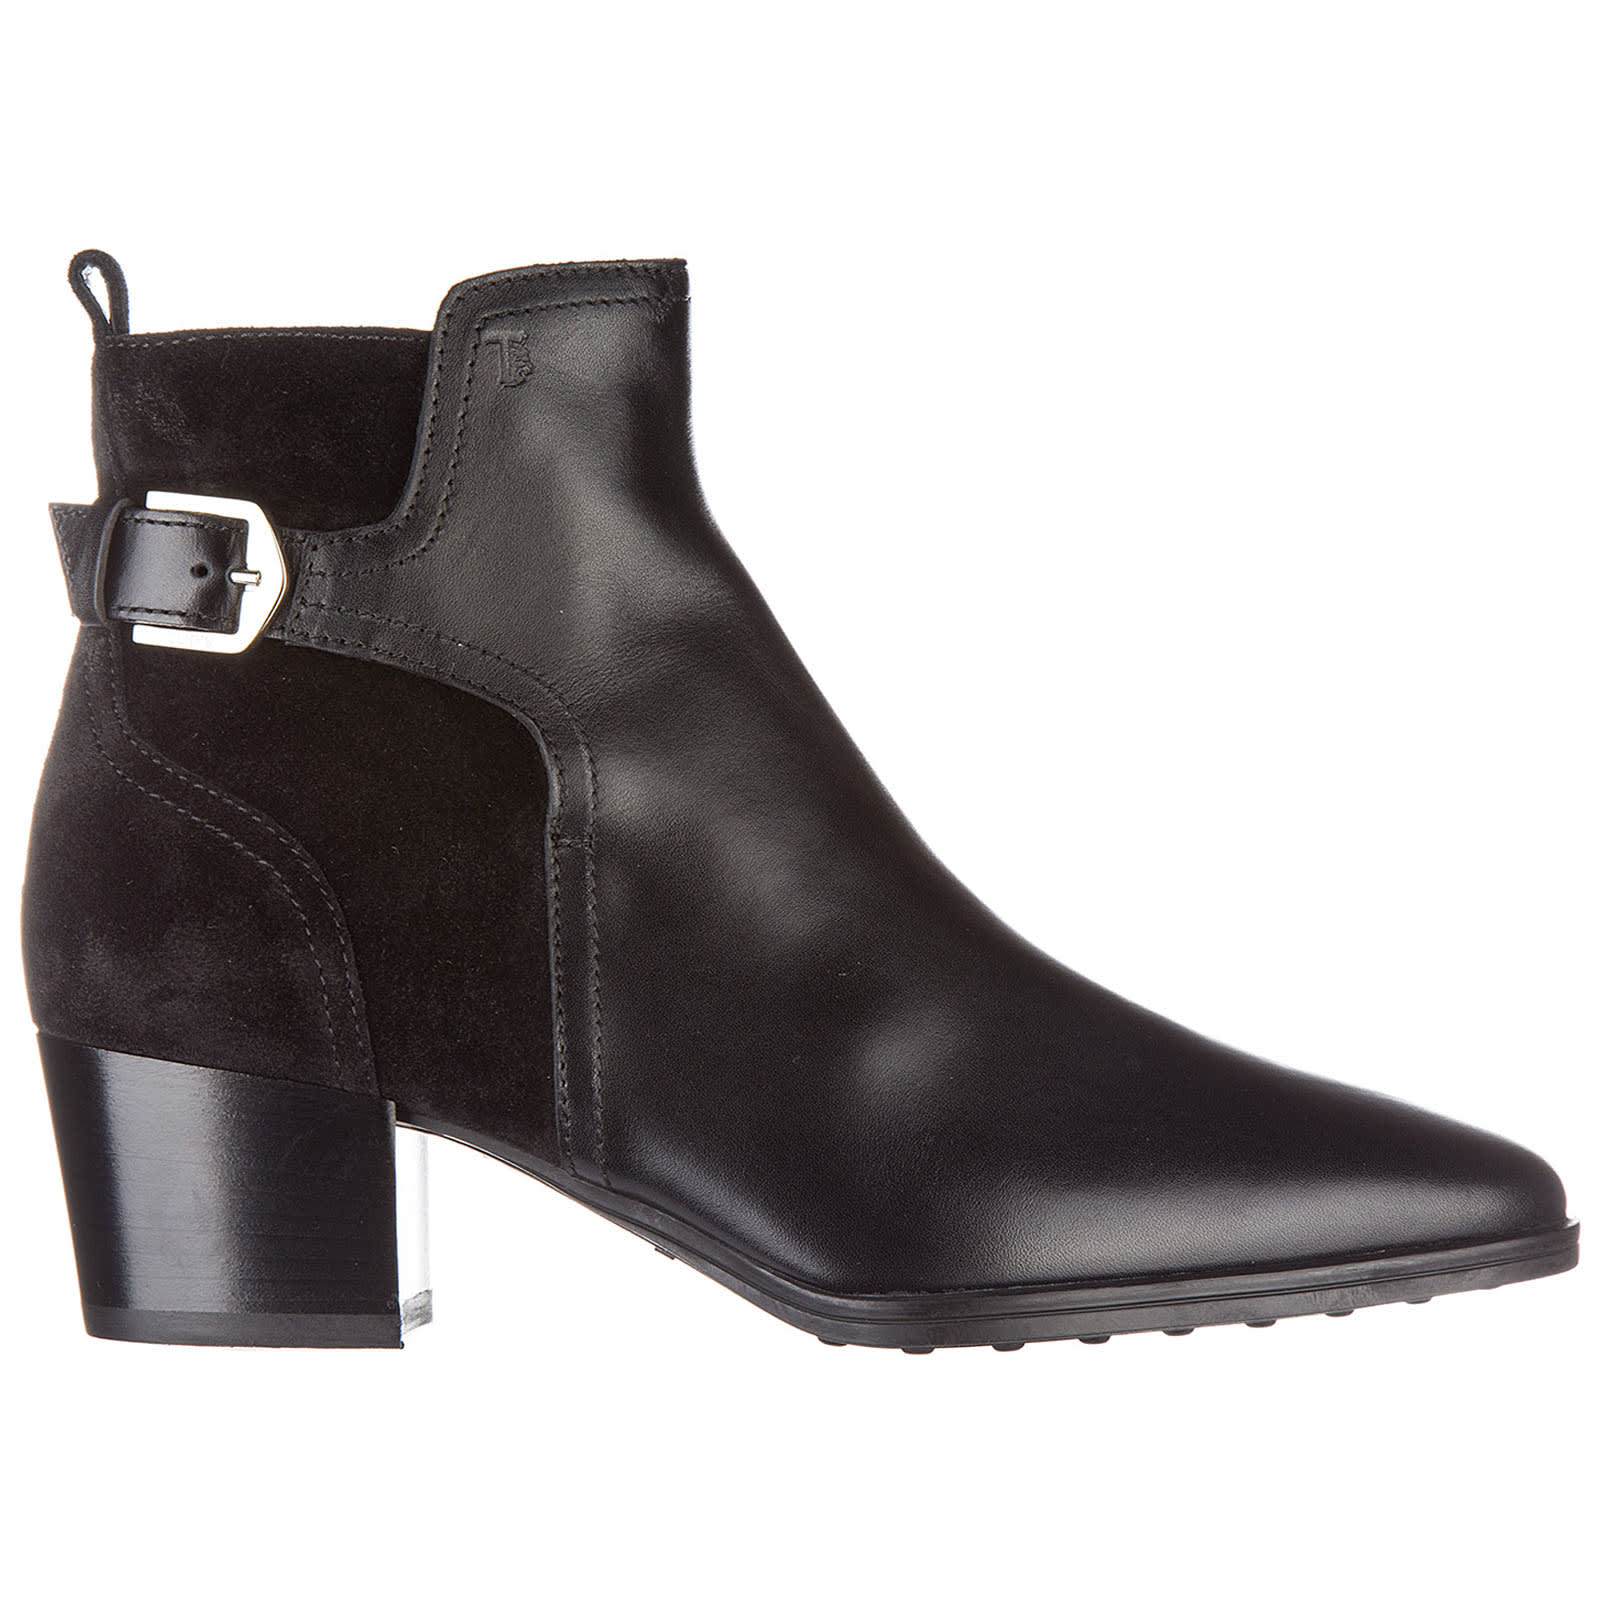 Tods Heaven Heeled Ankle Boots